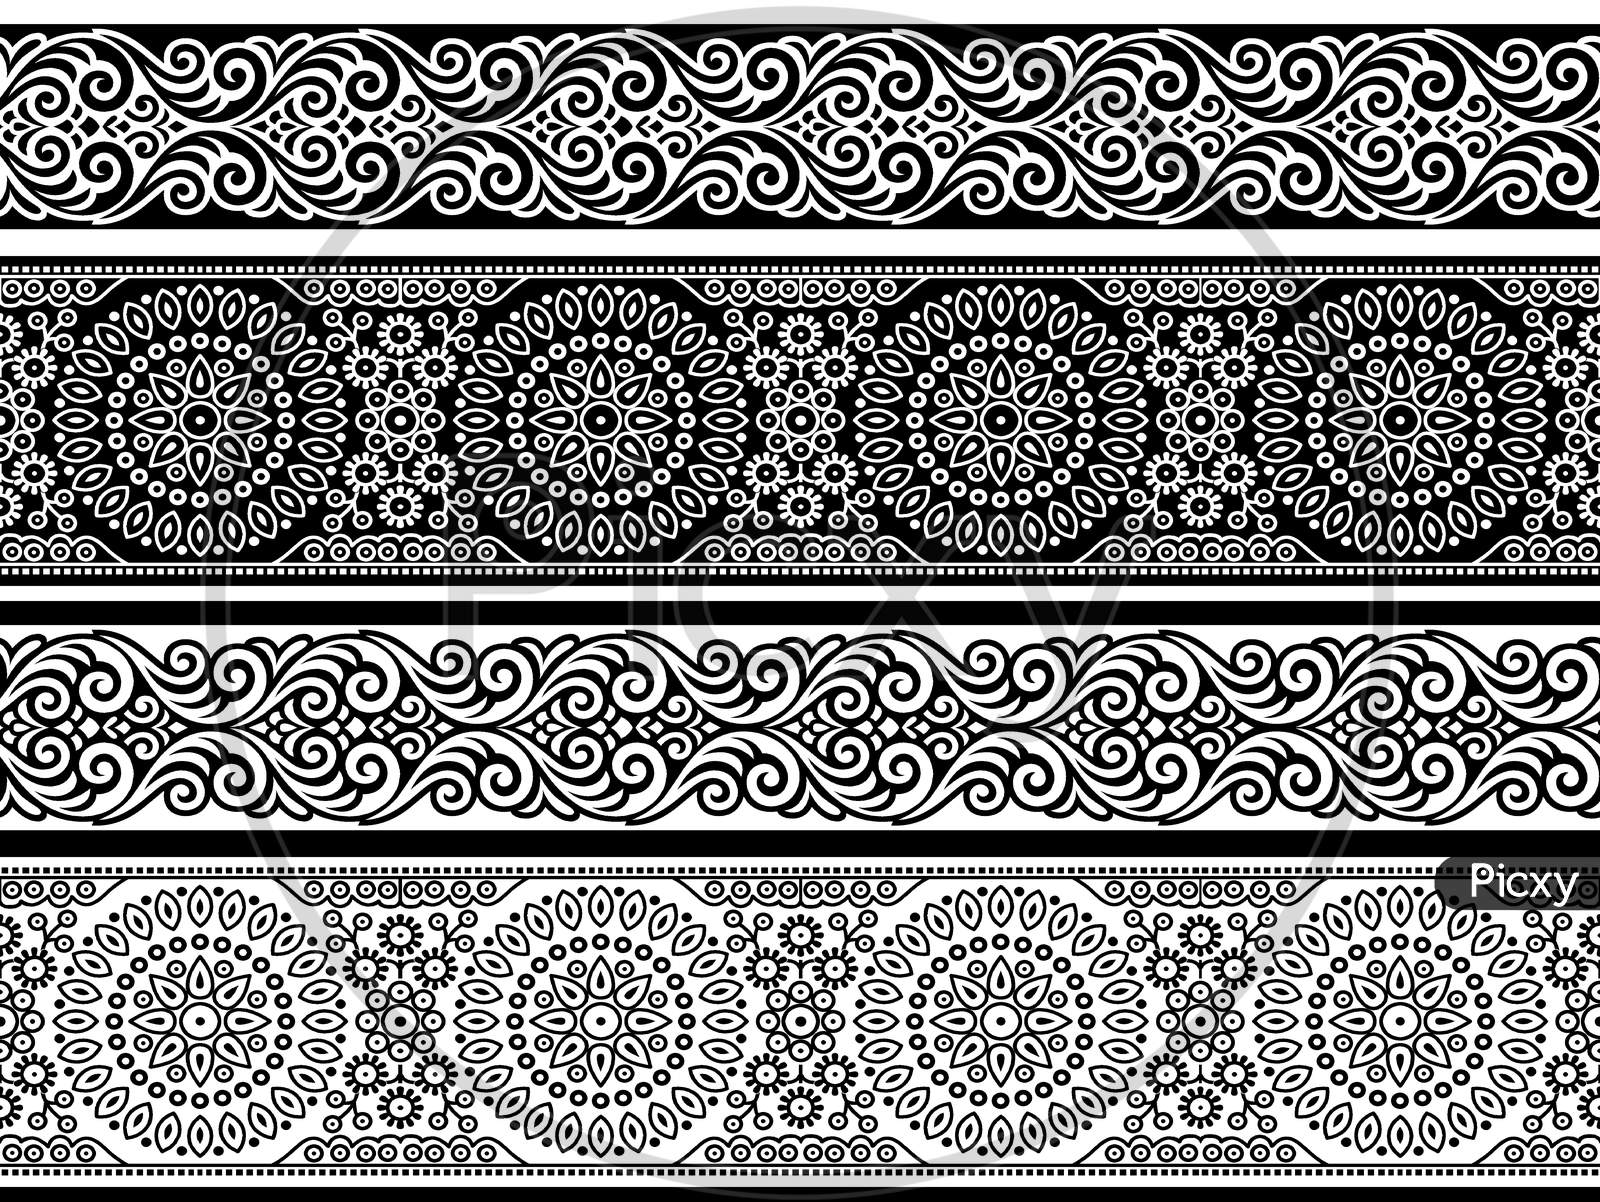 Image of Floral Abstract Black And White Border Design Background ...